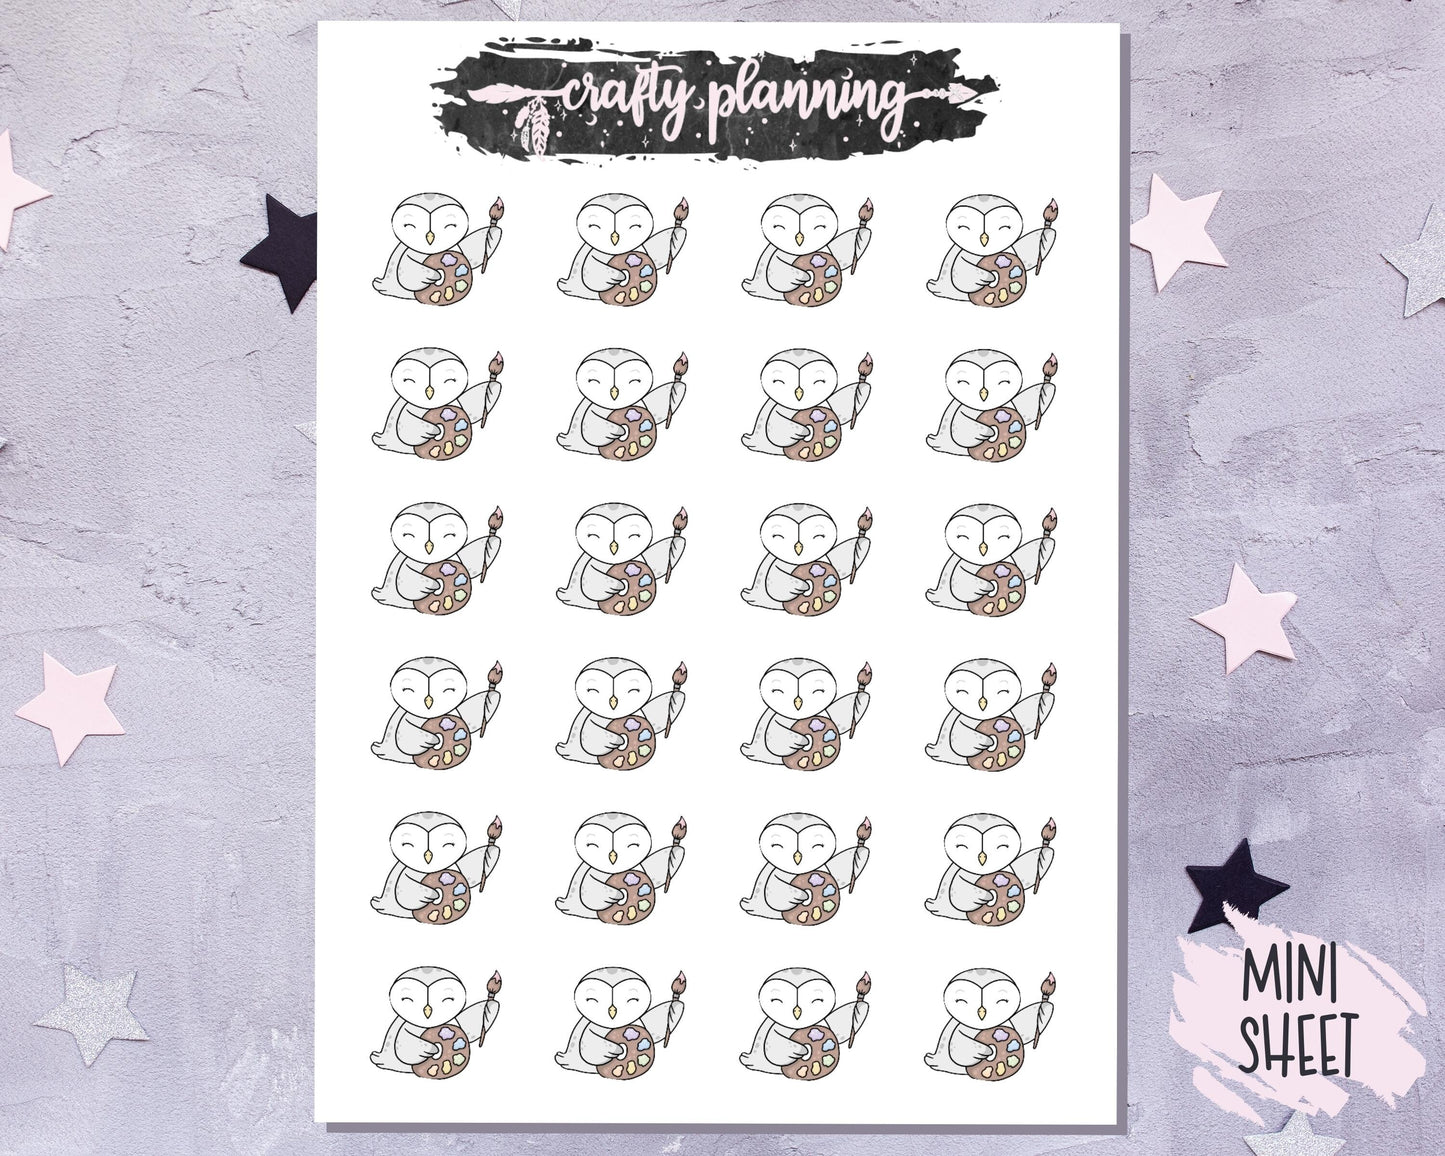 Owl Stickers, Painting Stickers, Character Stickers, Art Stickers, Craft Stickers, Planner Stickers, Functional Stickers